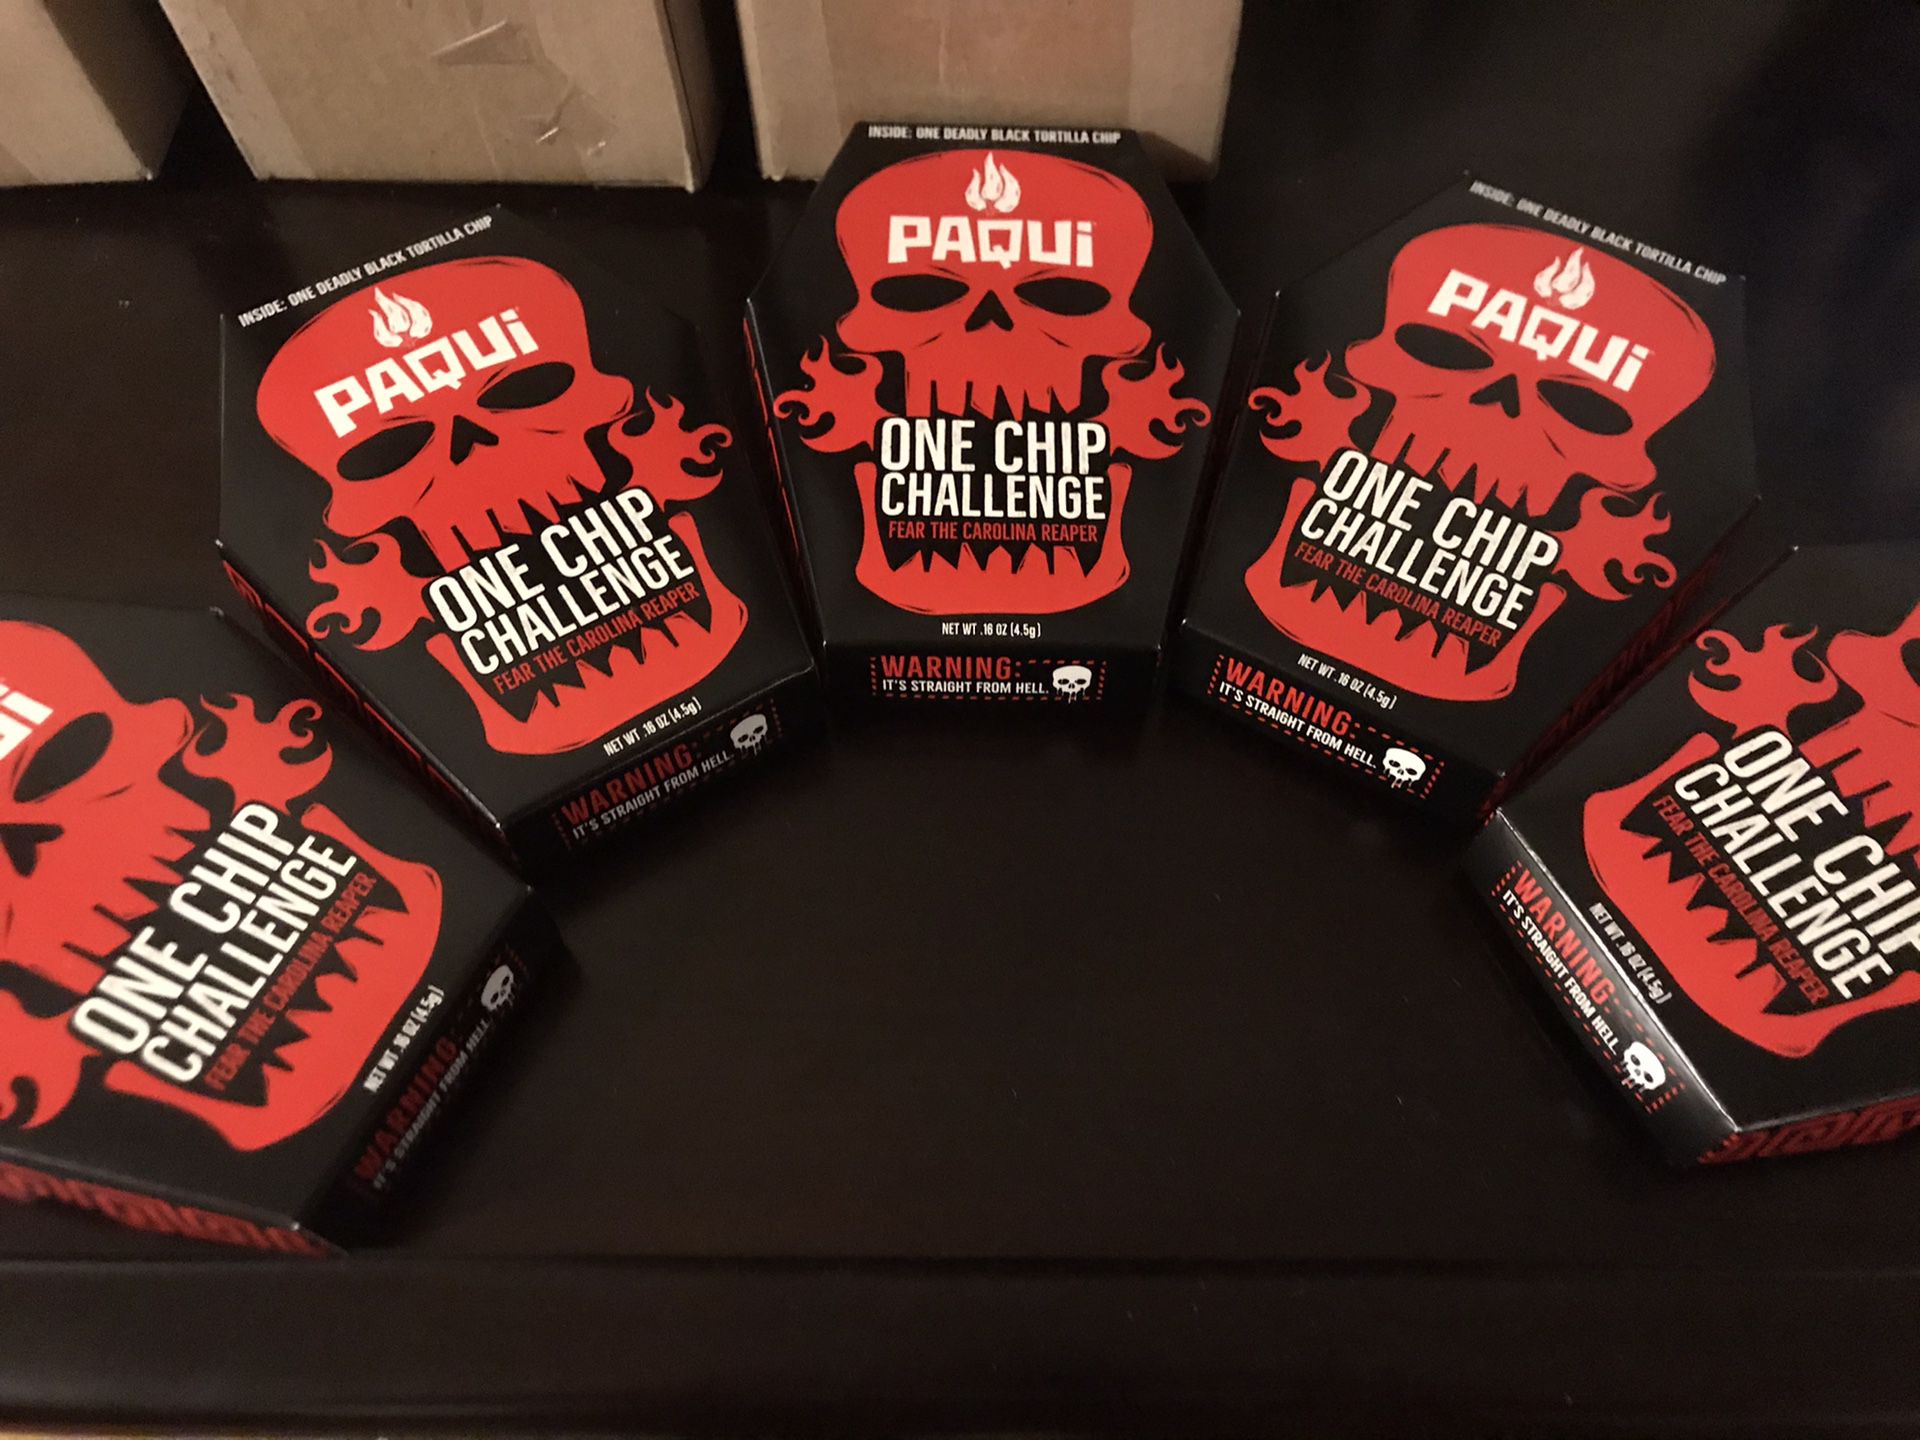 5 Paqui chips- One Chip Challenge